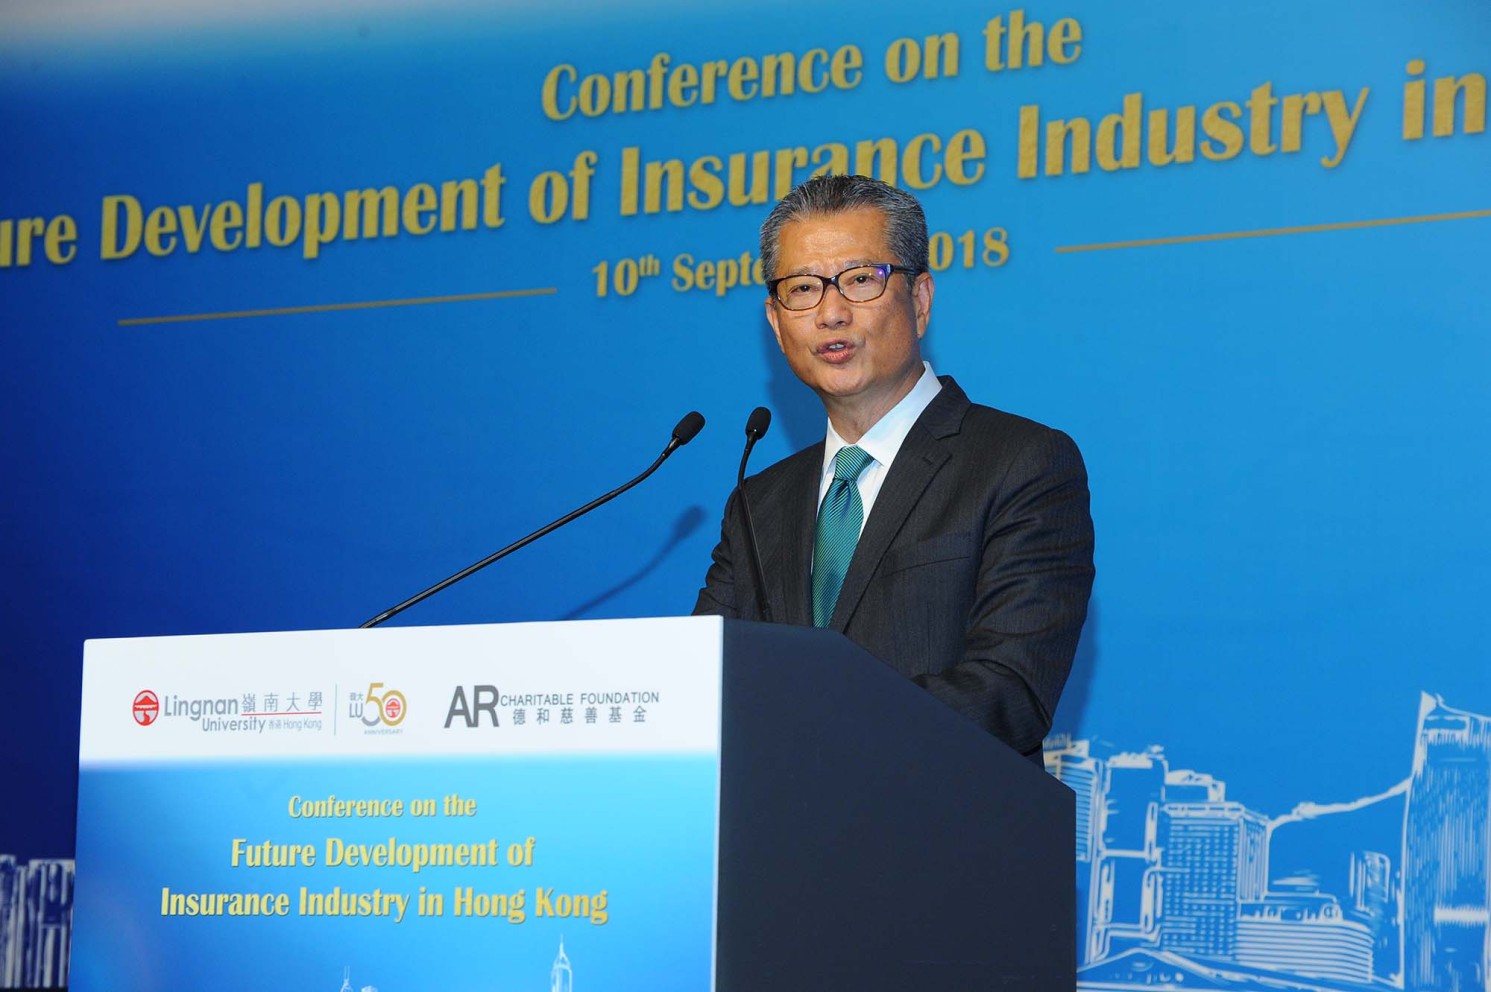 AR Charitable Foundation and Lingnan University co-organise “The Future Development of Insurance Industry in Hong Kong” Conference